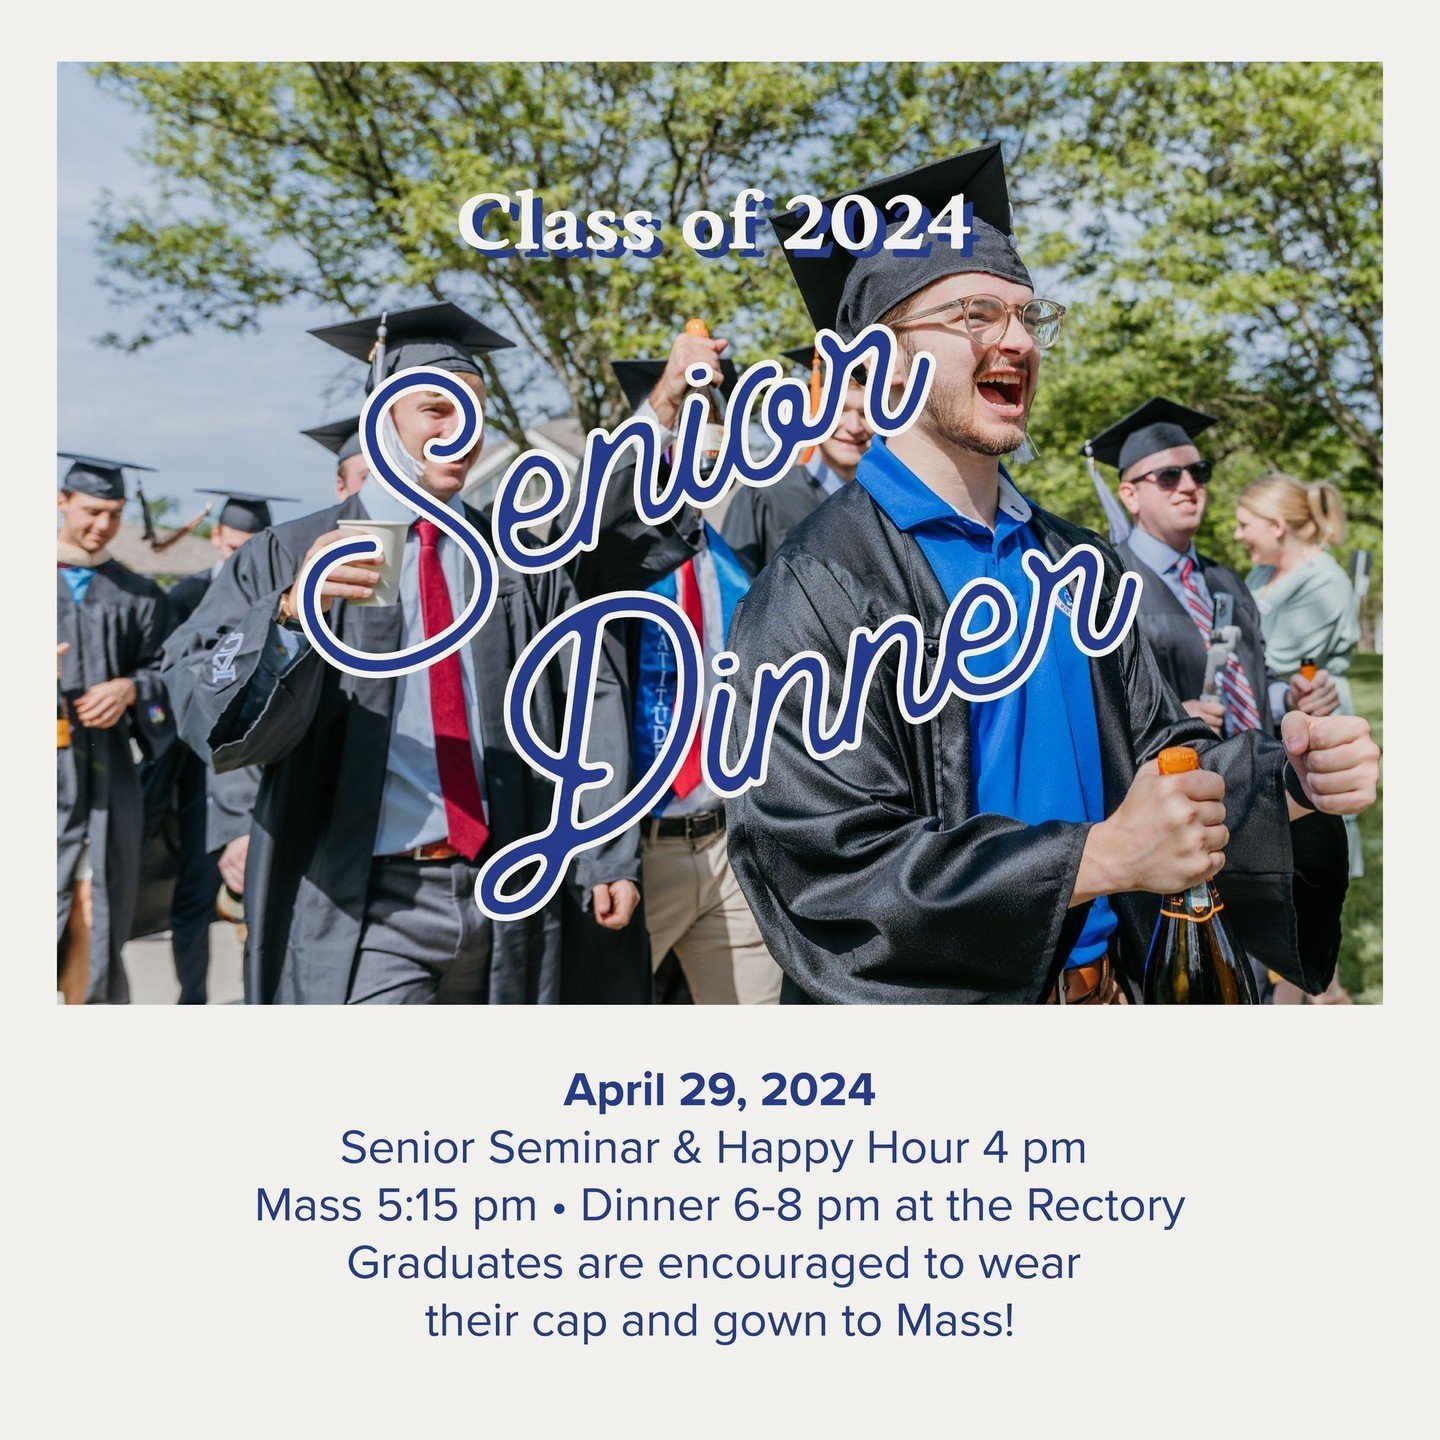 Just a reminder, our senior Dinner Celebration is tonight! We can't see all of our #KUCatholic seniors before they graduate in a couple of weeks! And don't forget to have your cap and gown ready for graduation day, Mass!

It's not too late to registe